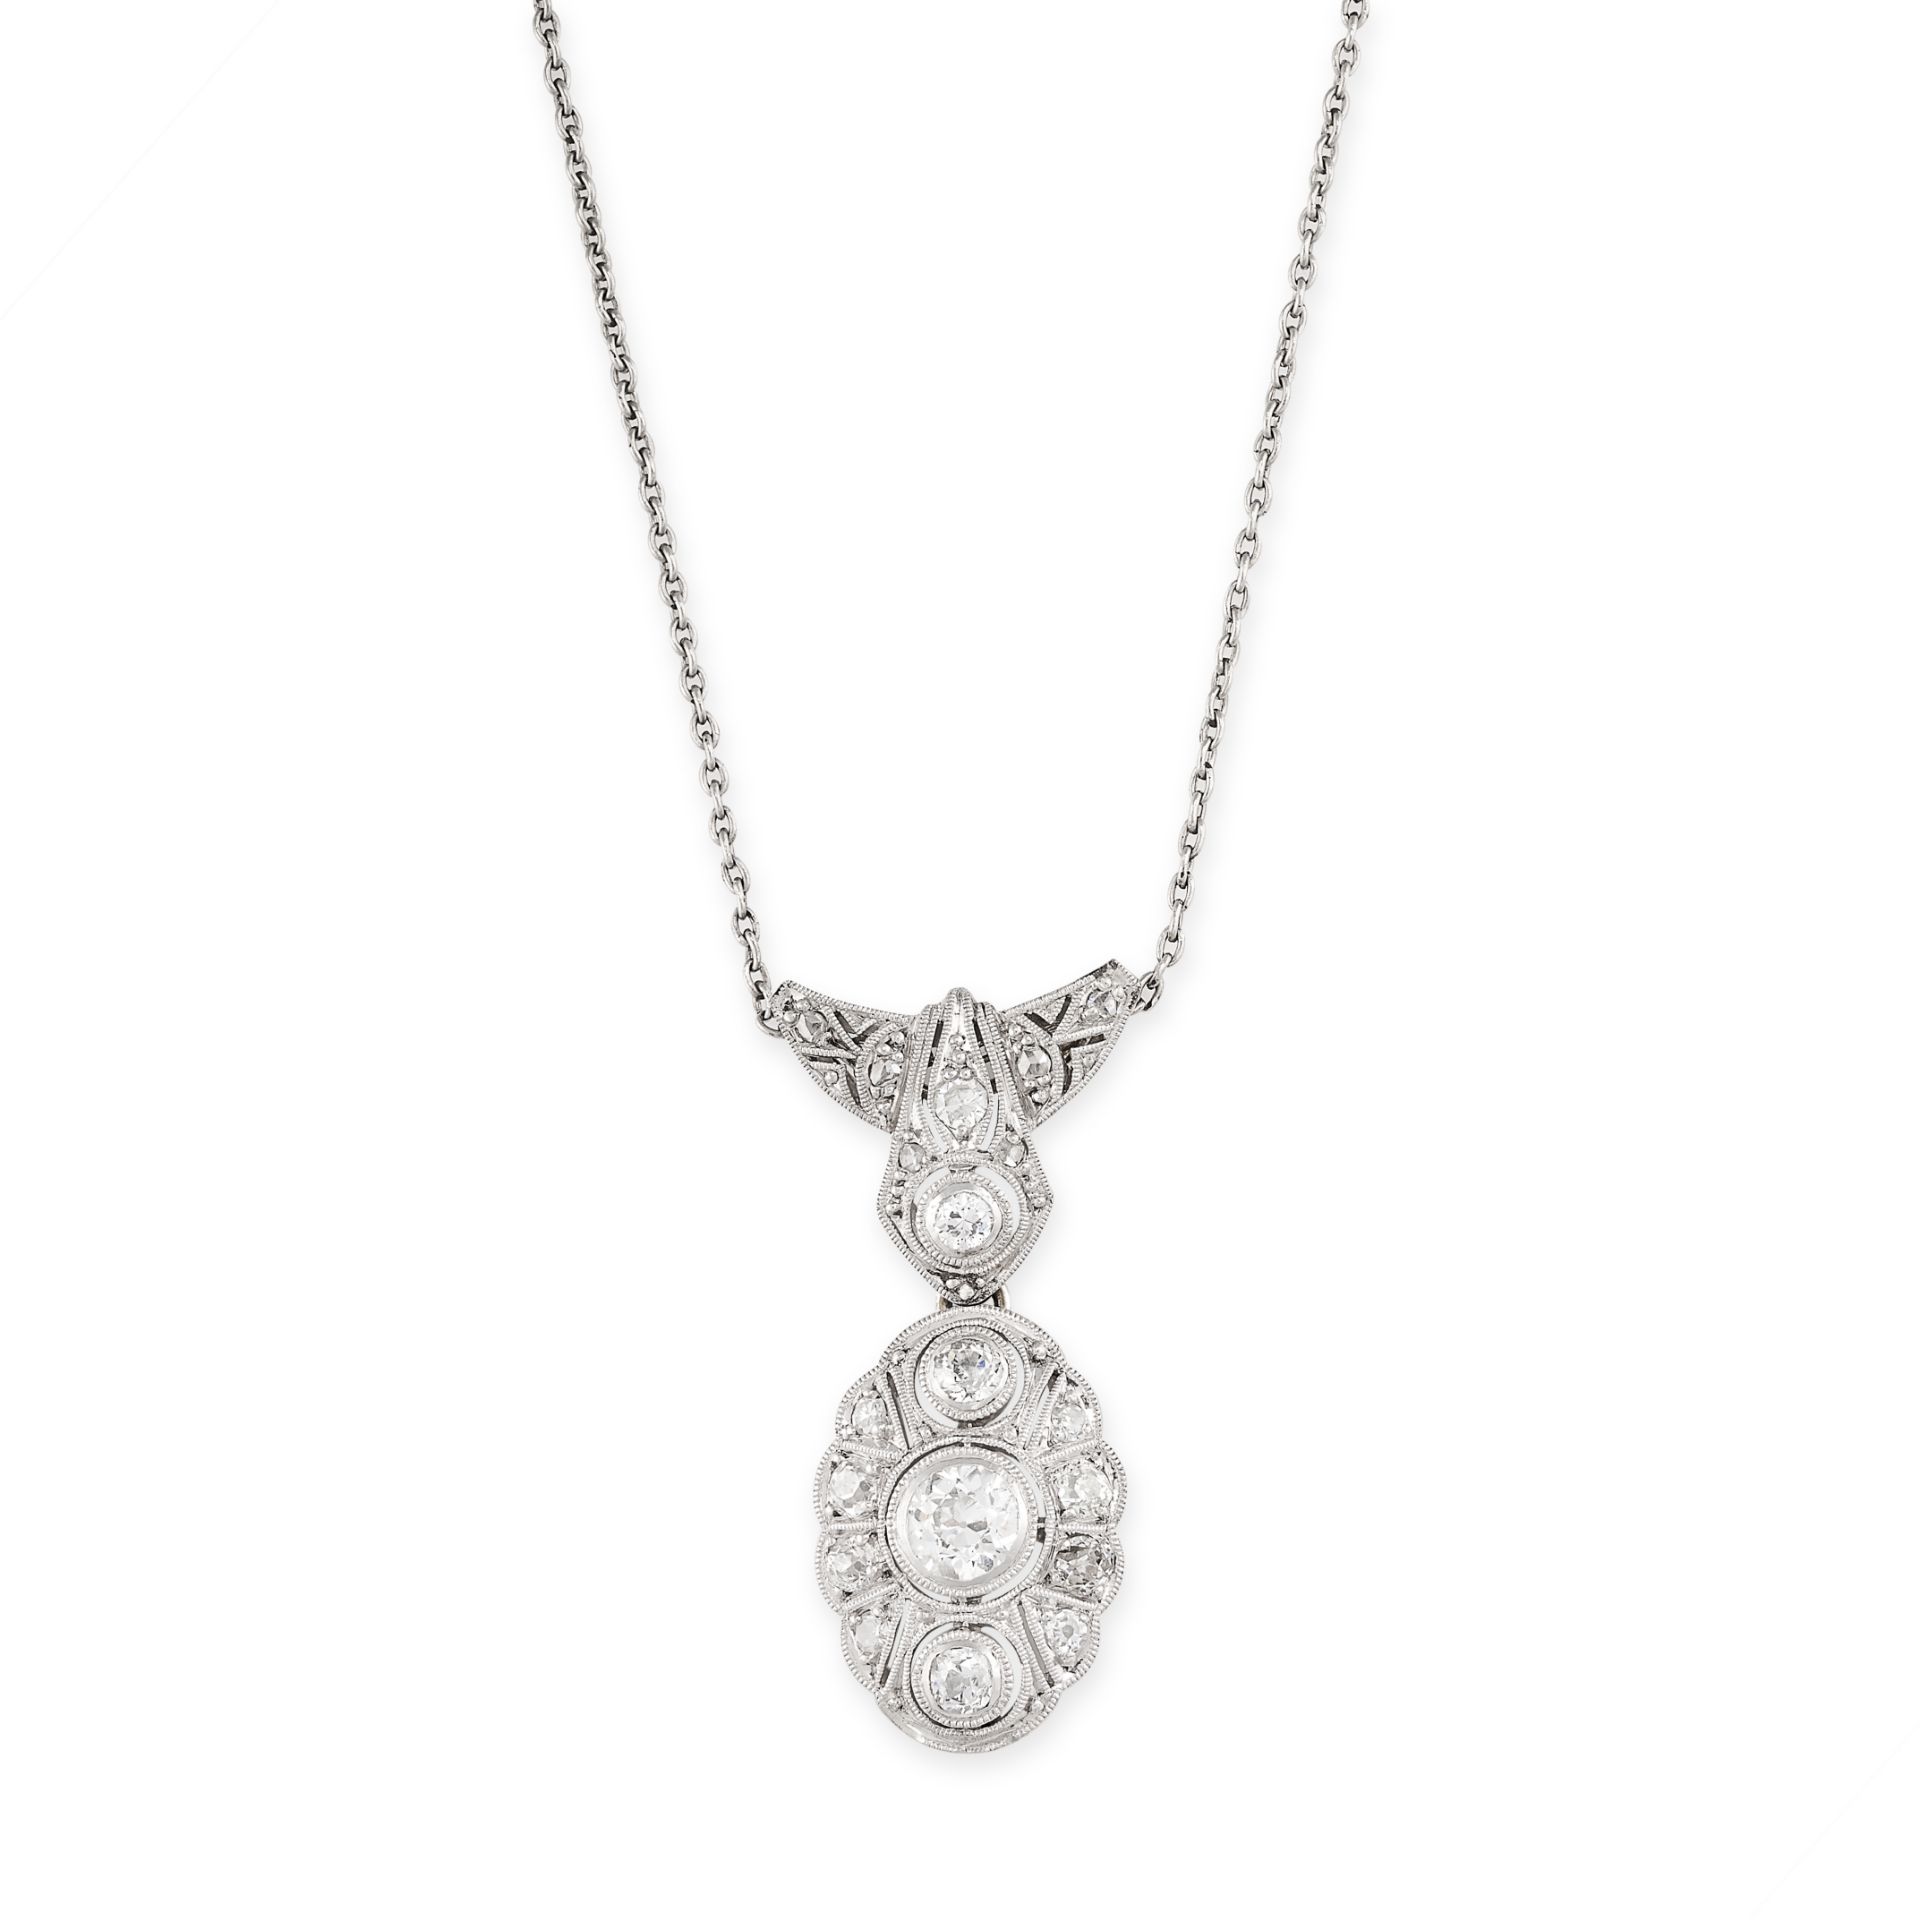 AN ART DECO DIAMOND PENDANT NECKLACE set with a trio of principal old cut diamonds, accented by